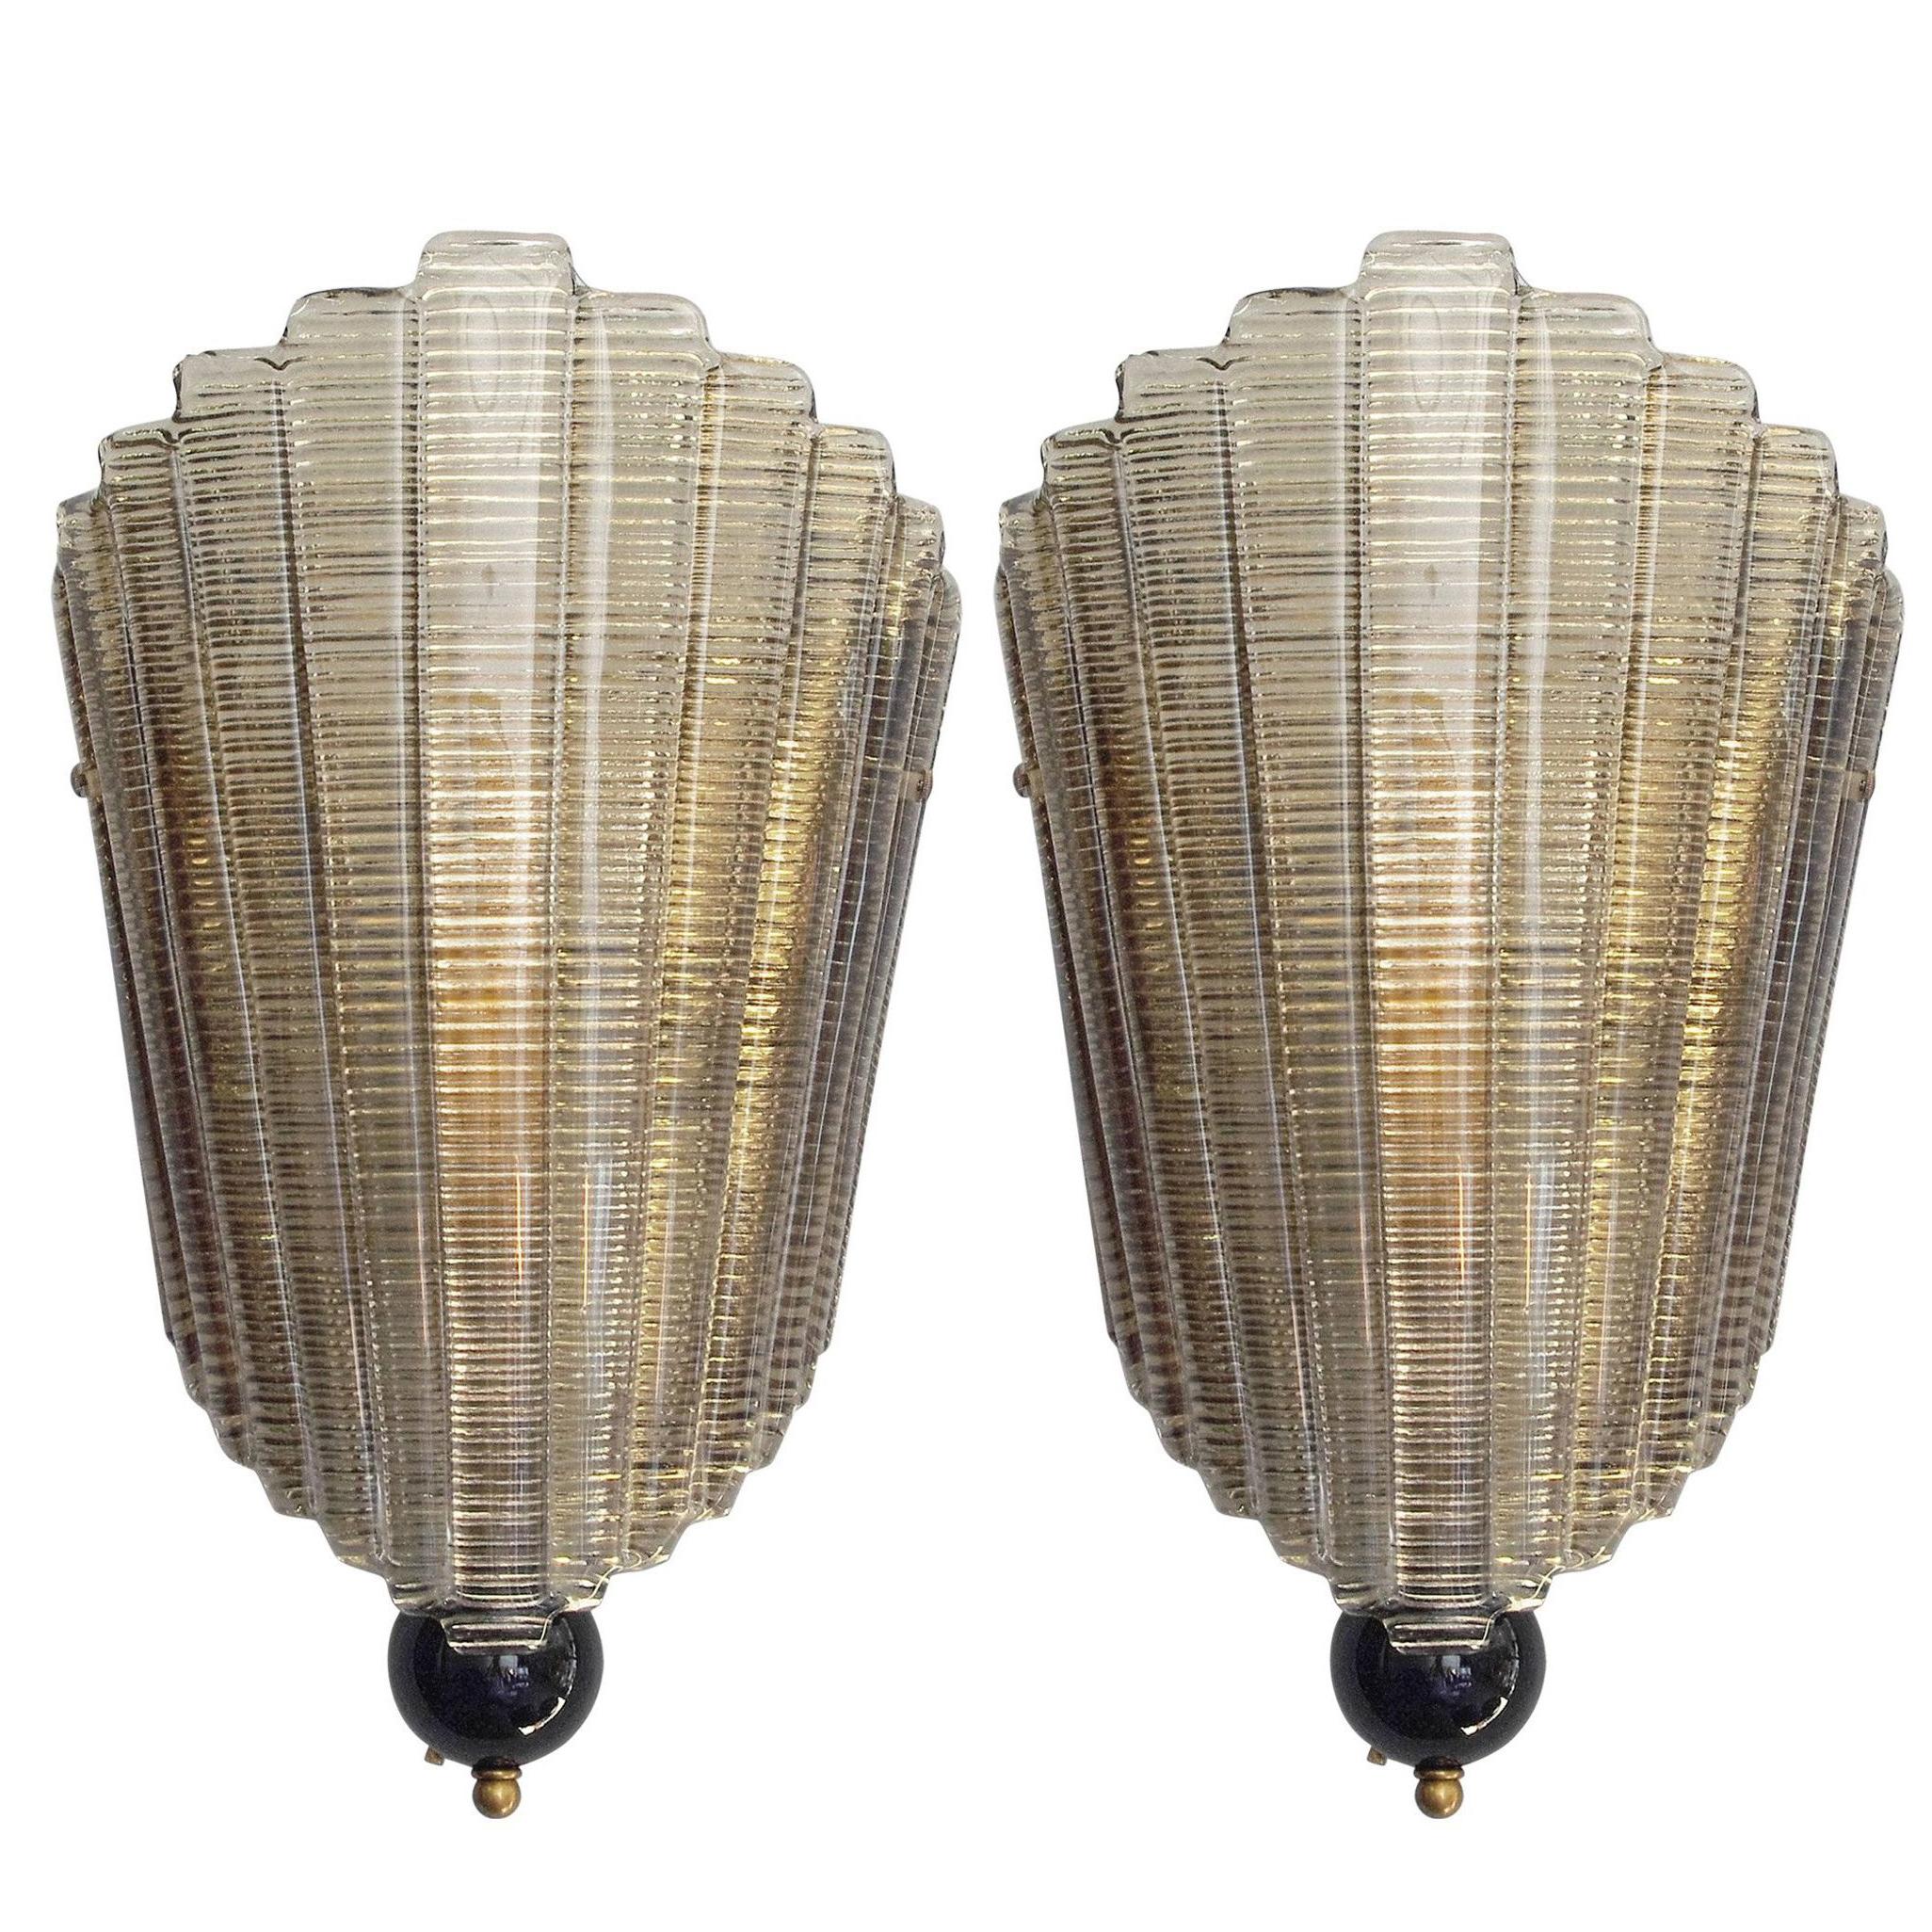 Pair of Fan Wall Sconces